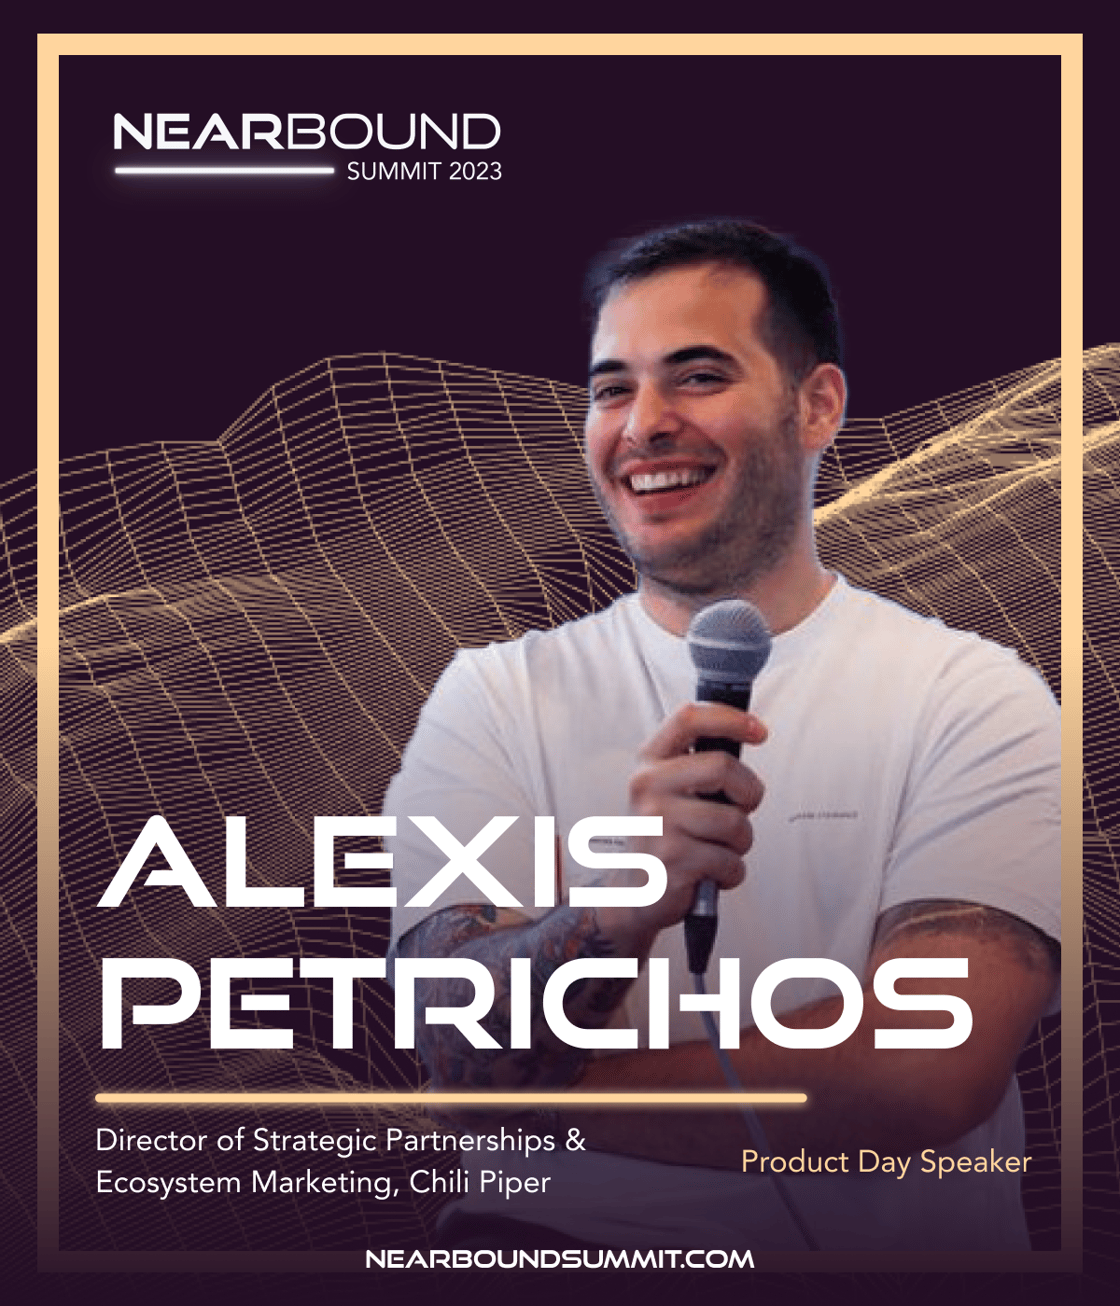 Alexis Petrichos - Product Day